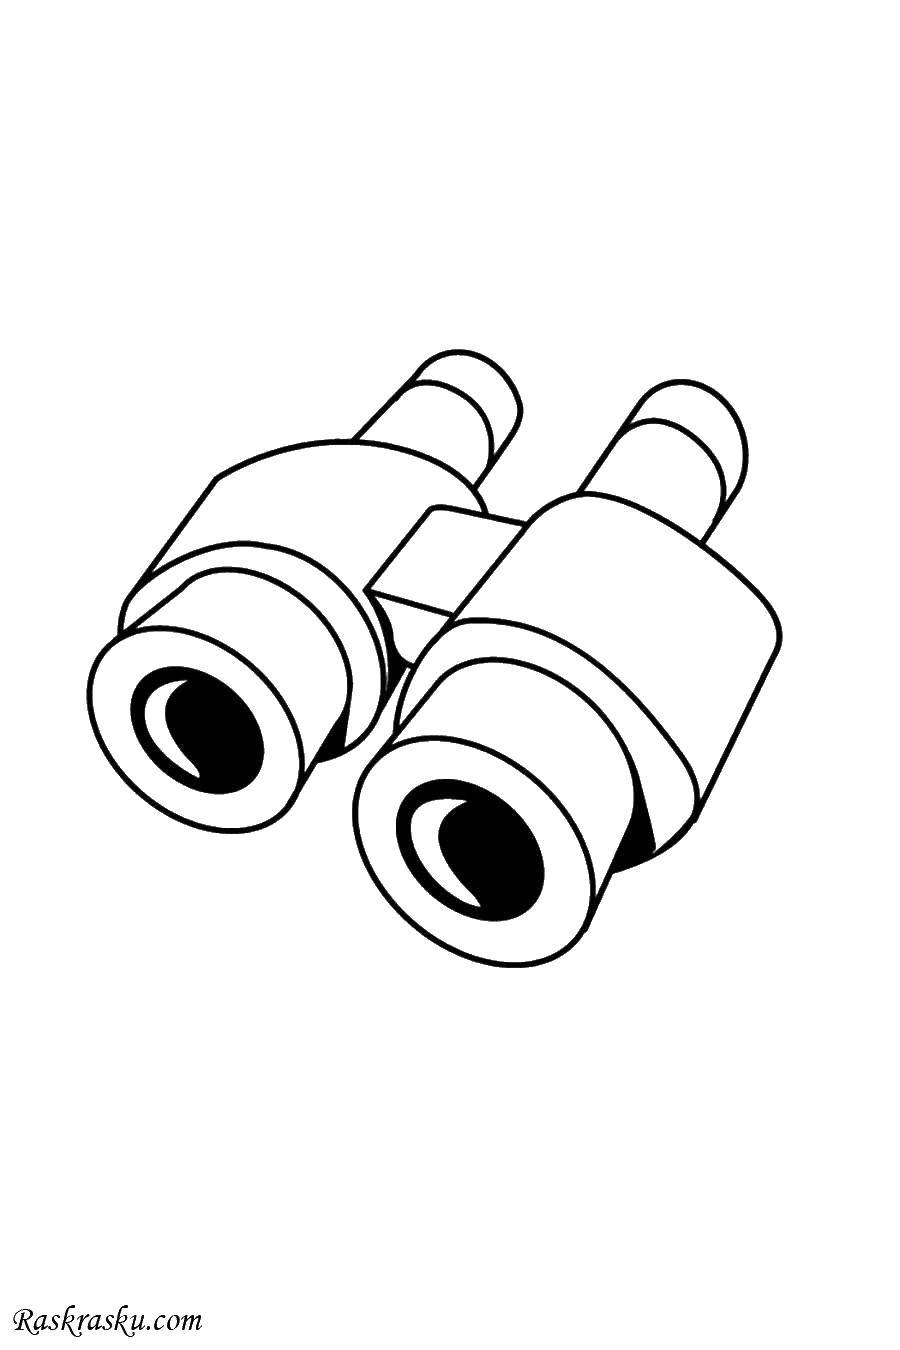 Coloring Binoculars. Category the objects. Tags:  items, binoculars.